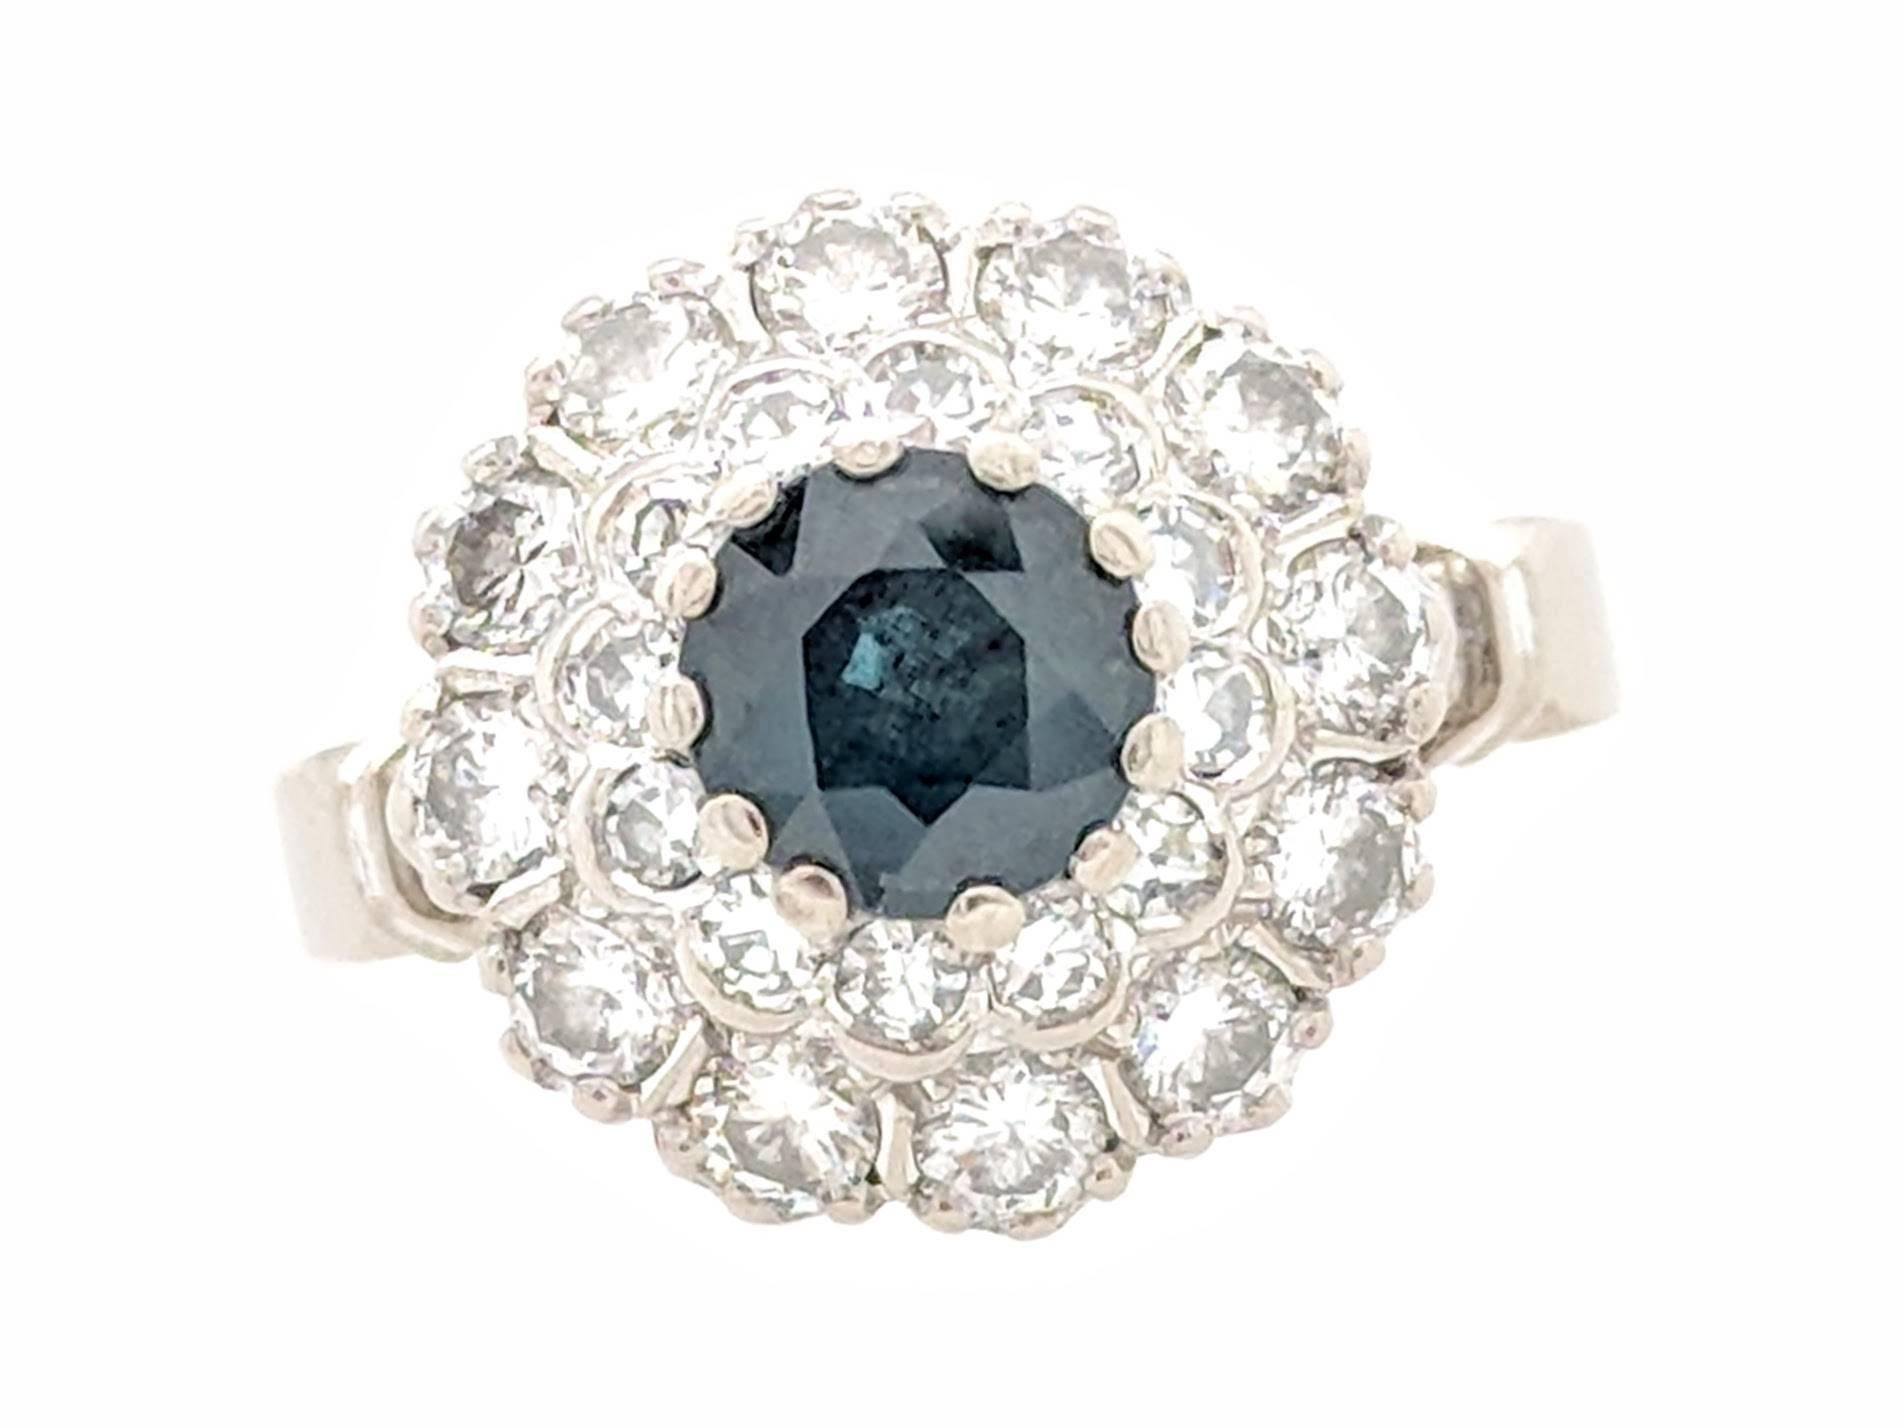 You are viewing a beautiful sapphire and diamond estate ring. Any woman would love to add this piece to their collection!

This ring is crafted from 18k white gold and weighs 6.6 grams. It features one approximately 1ct round sapphire, 12 .03ct